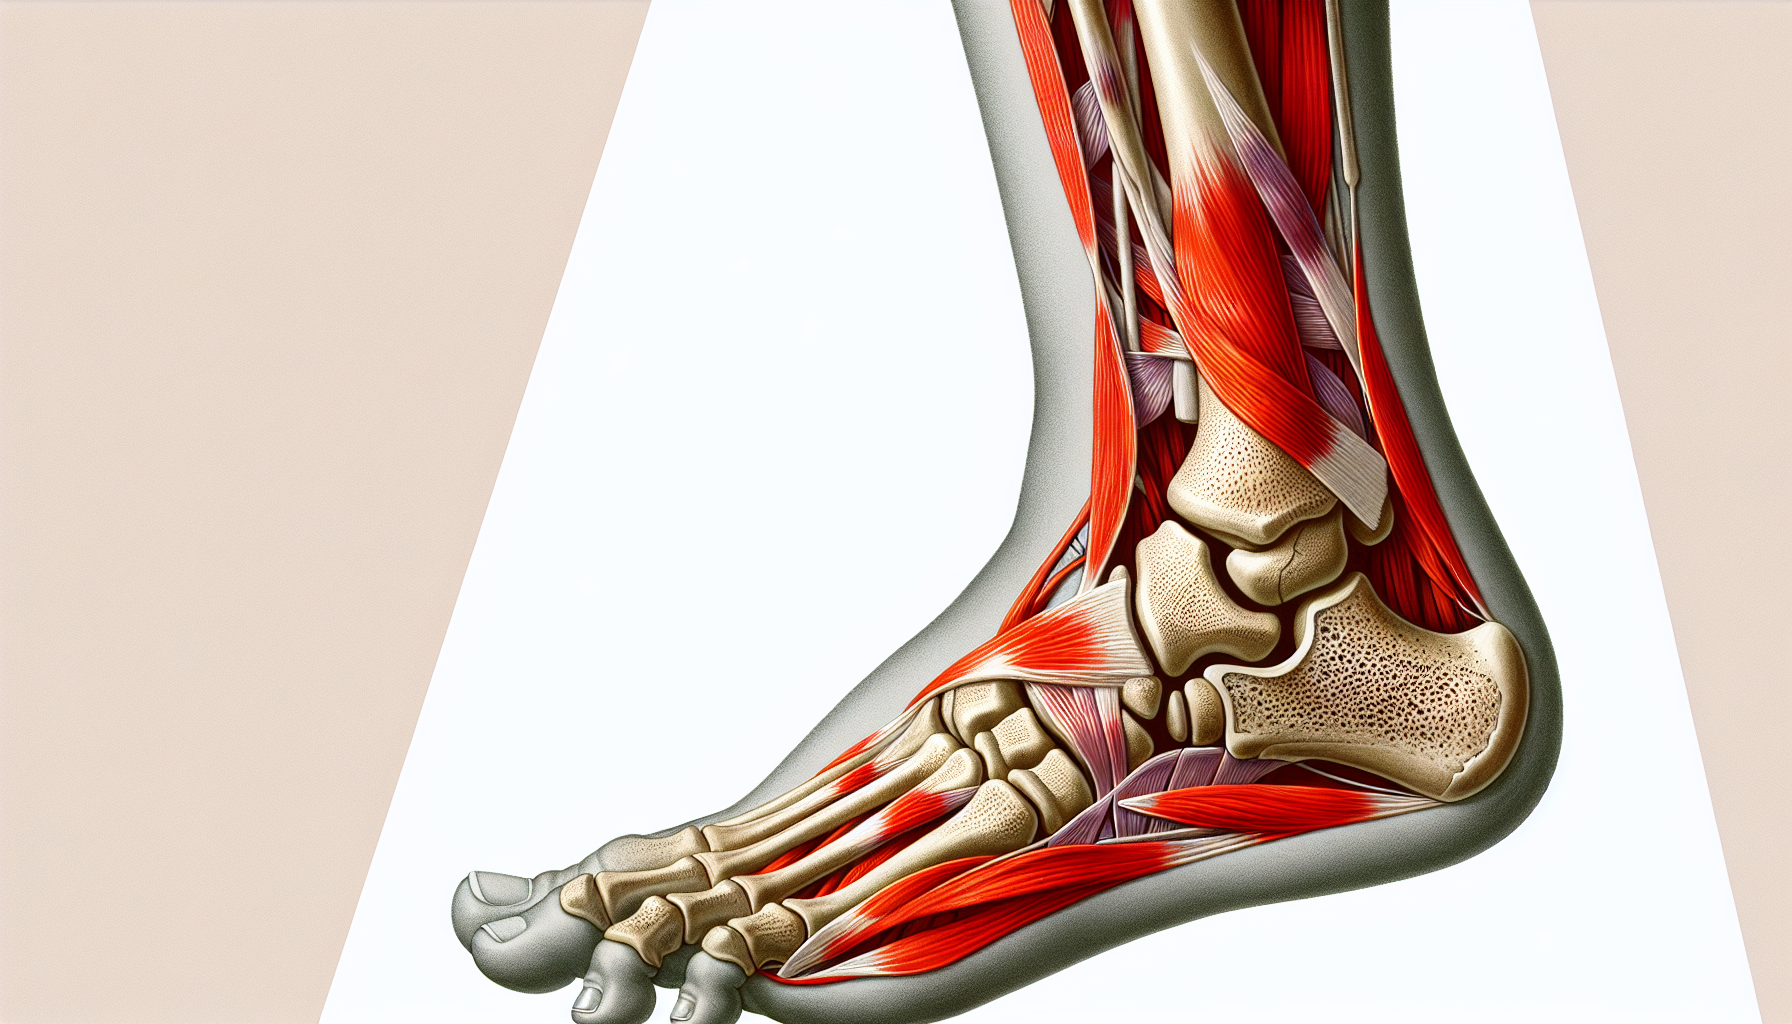 Ankle with highlighted peroneal tendons